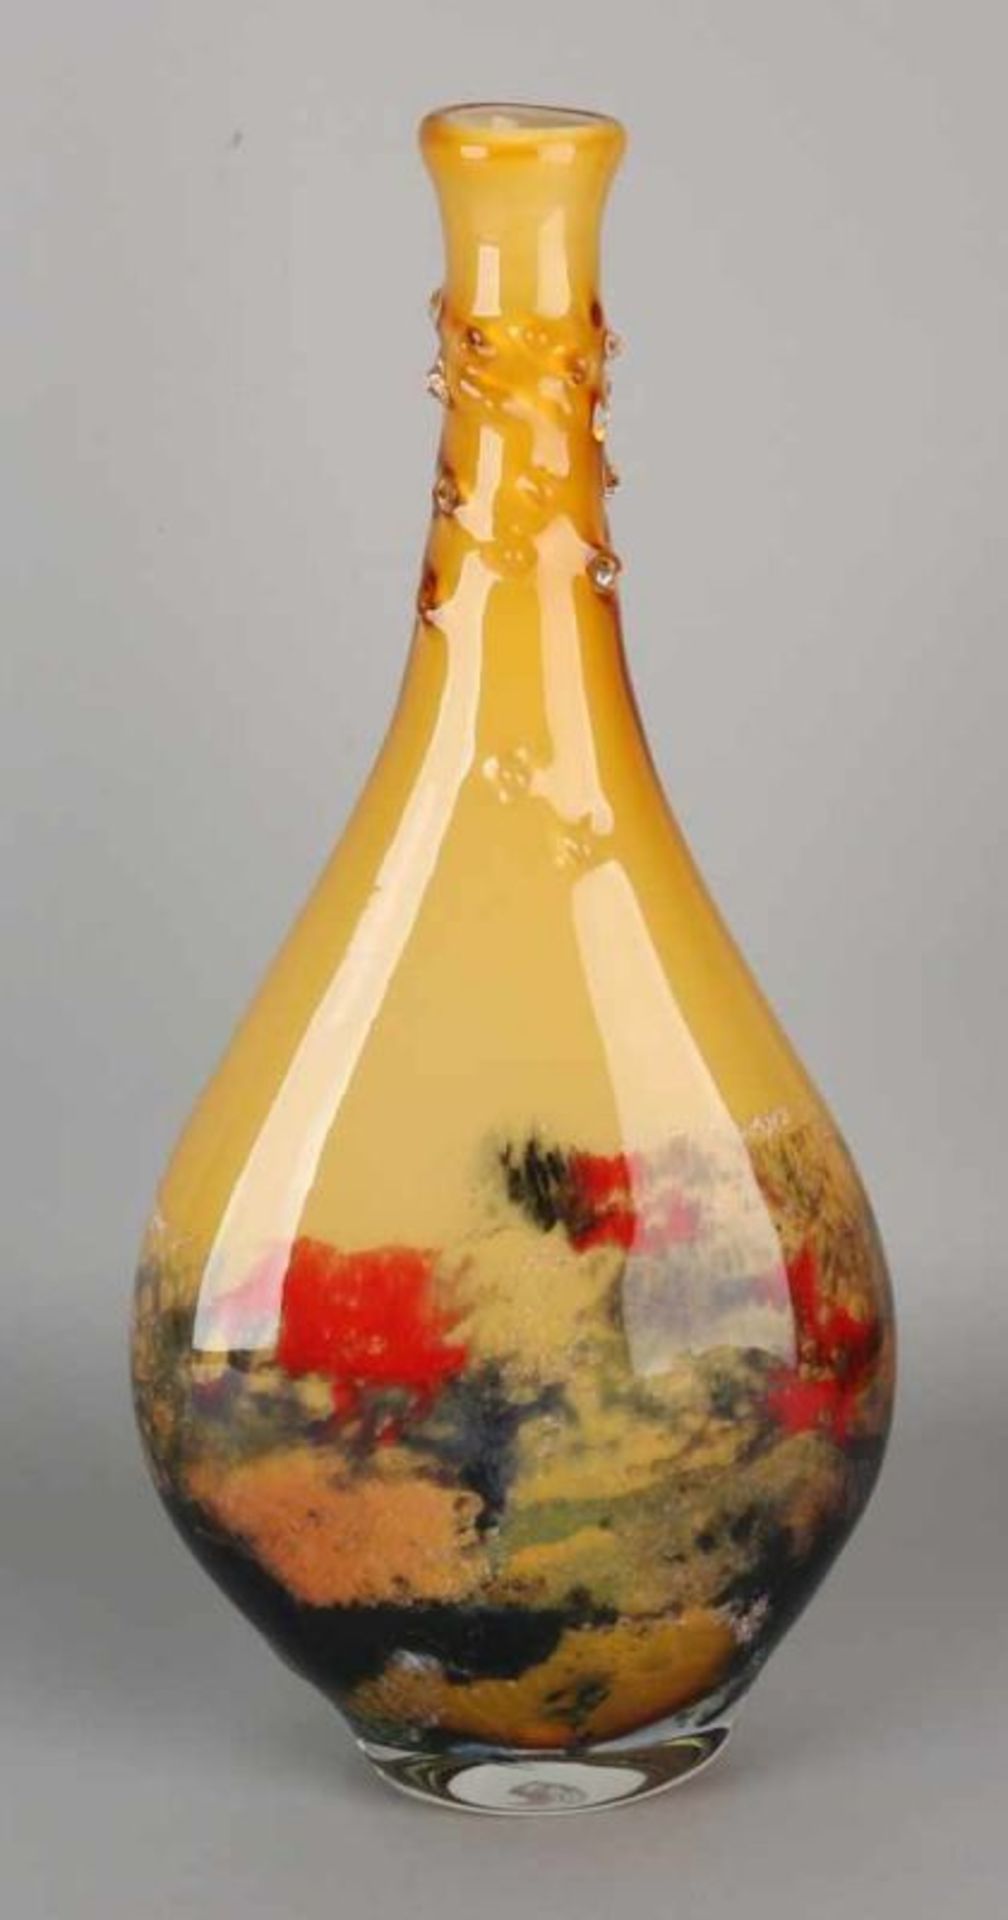 Large bottle shaped art glass vase with studs. Earth tones. 21st century. Size: H 49 cm. In good